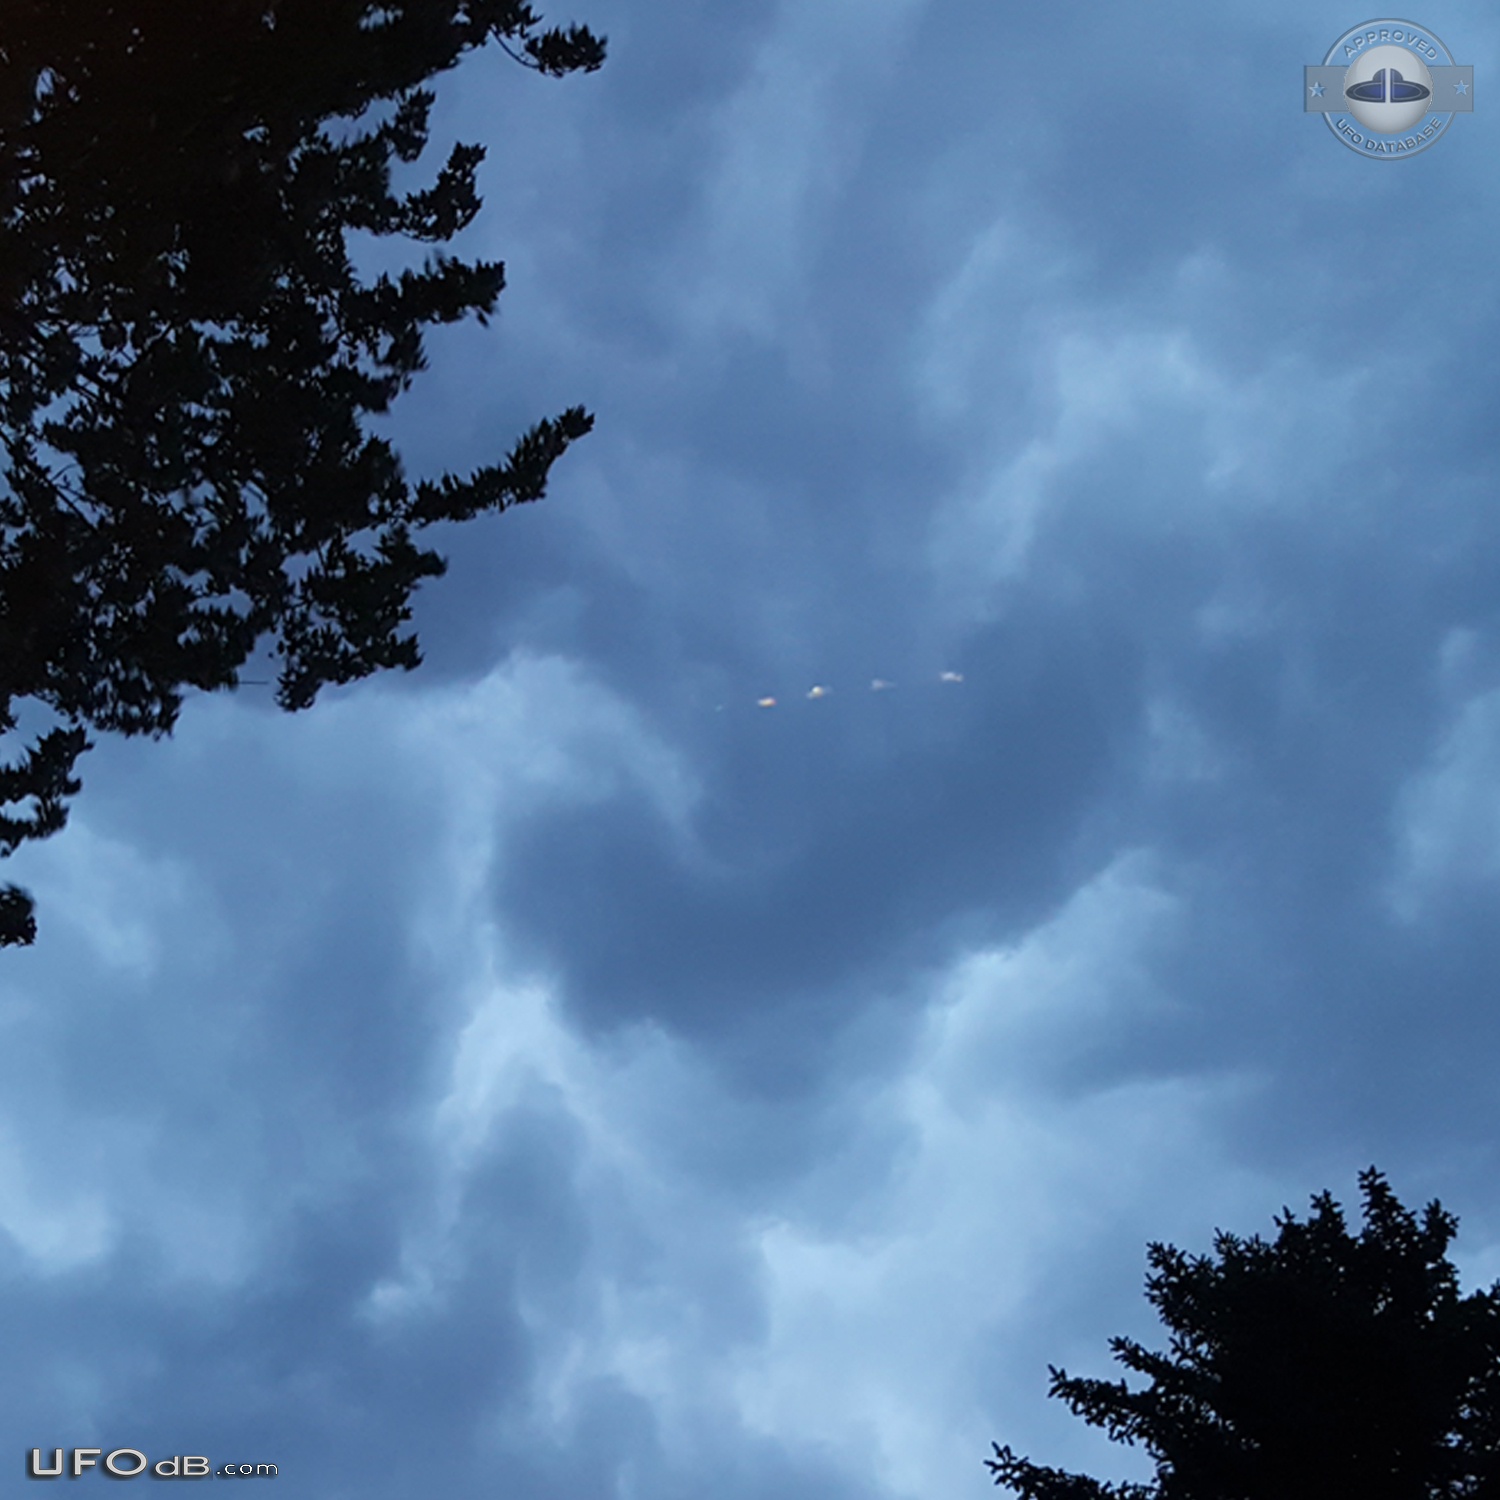 Looked like 5 disks UFOs appeared then disappeared just as fast - Indi UFO Picture #800-3